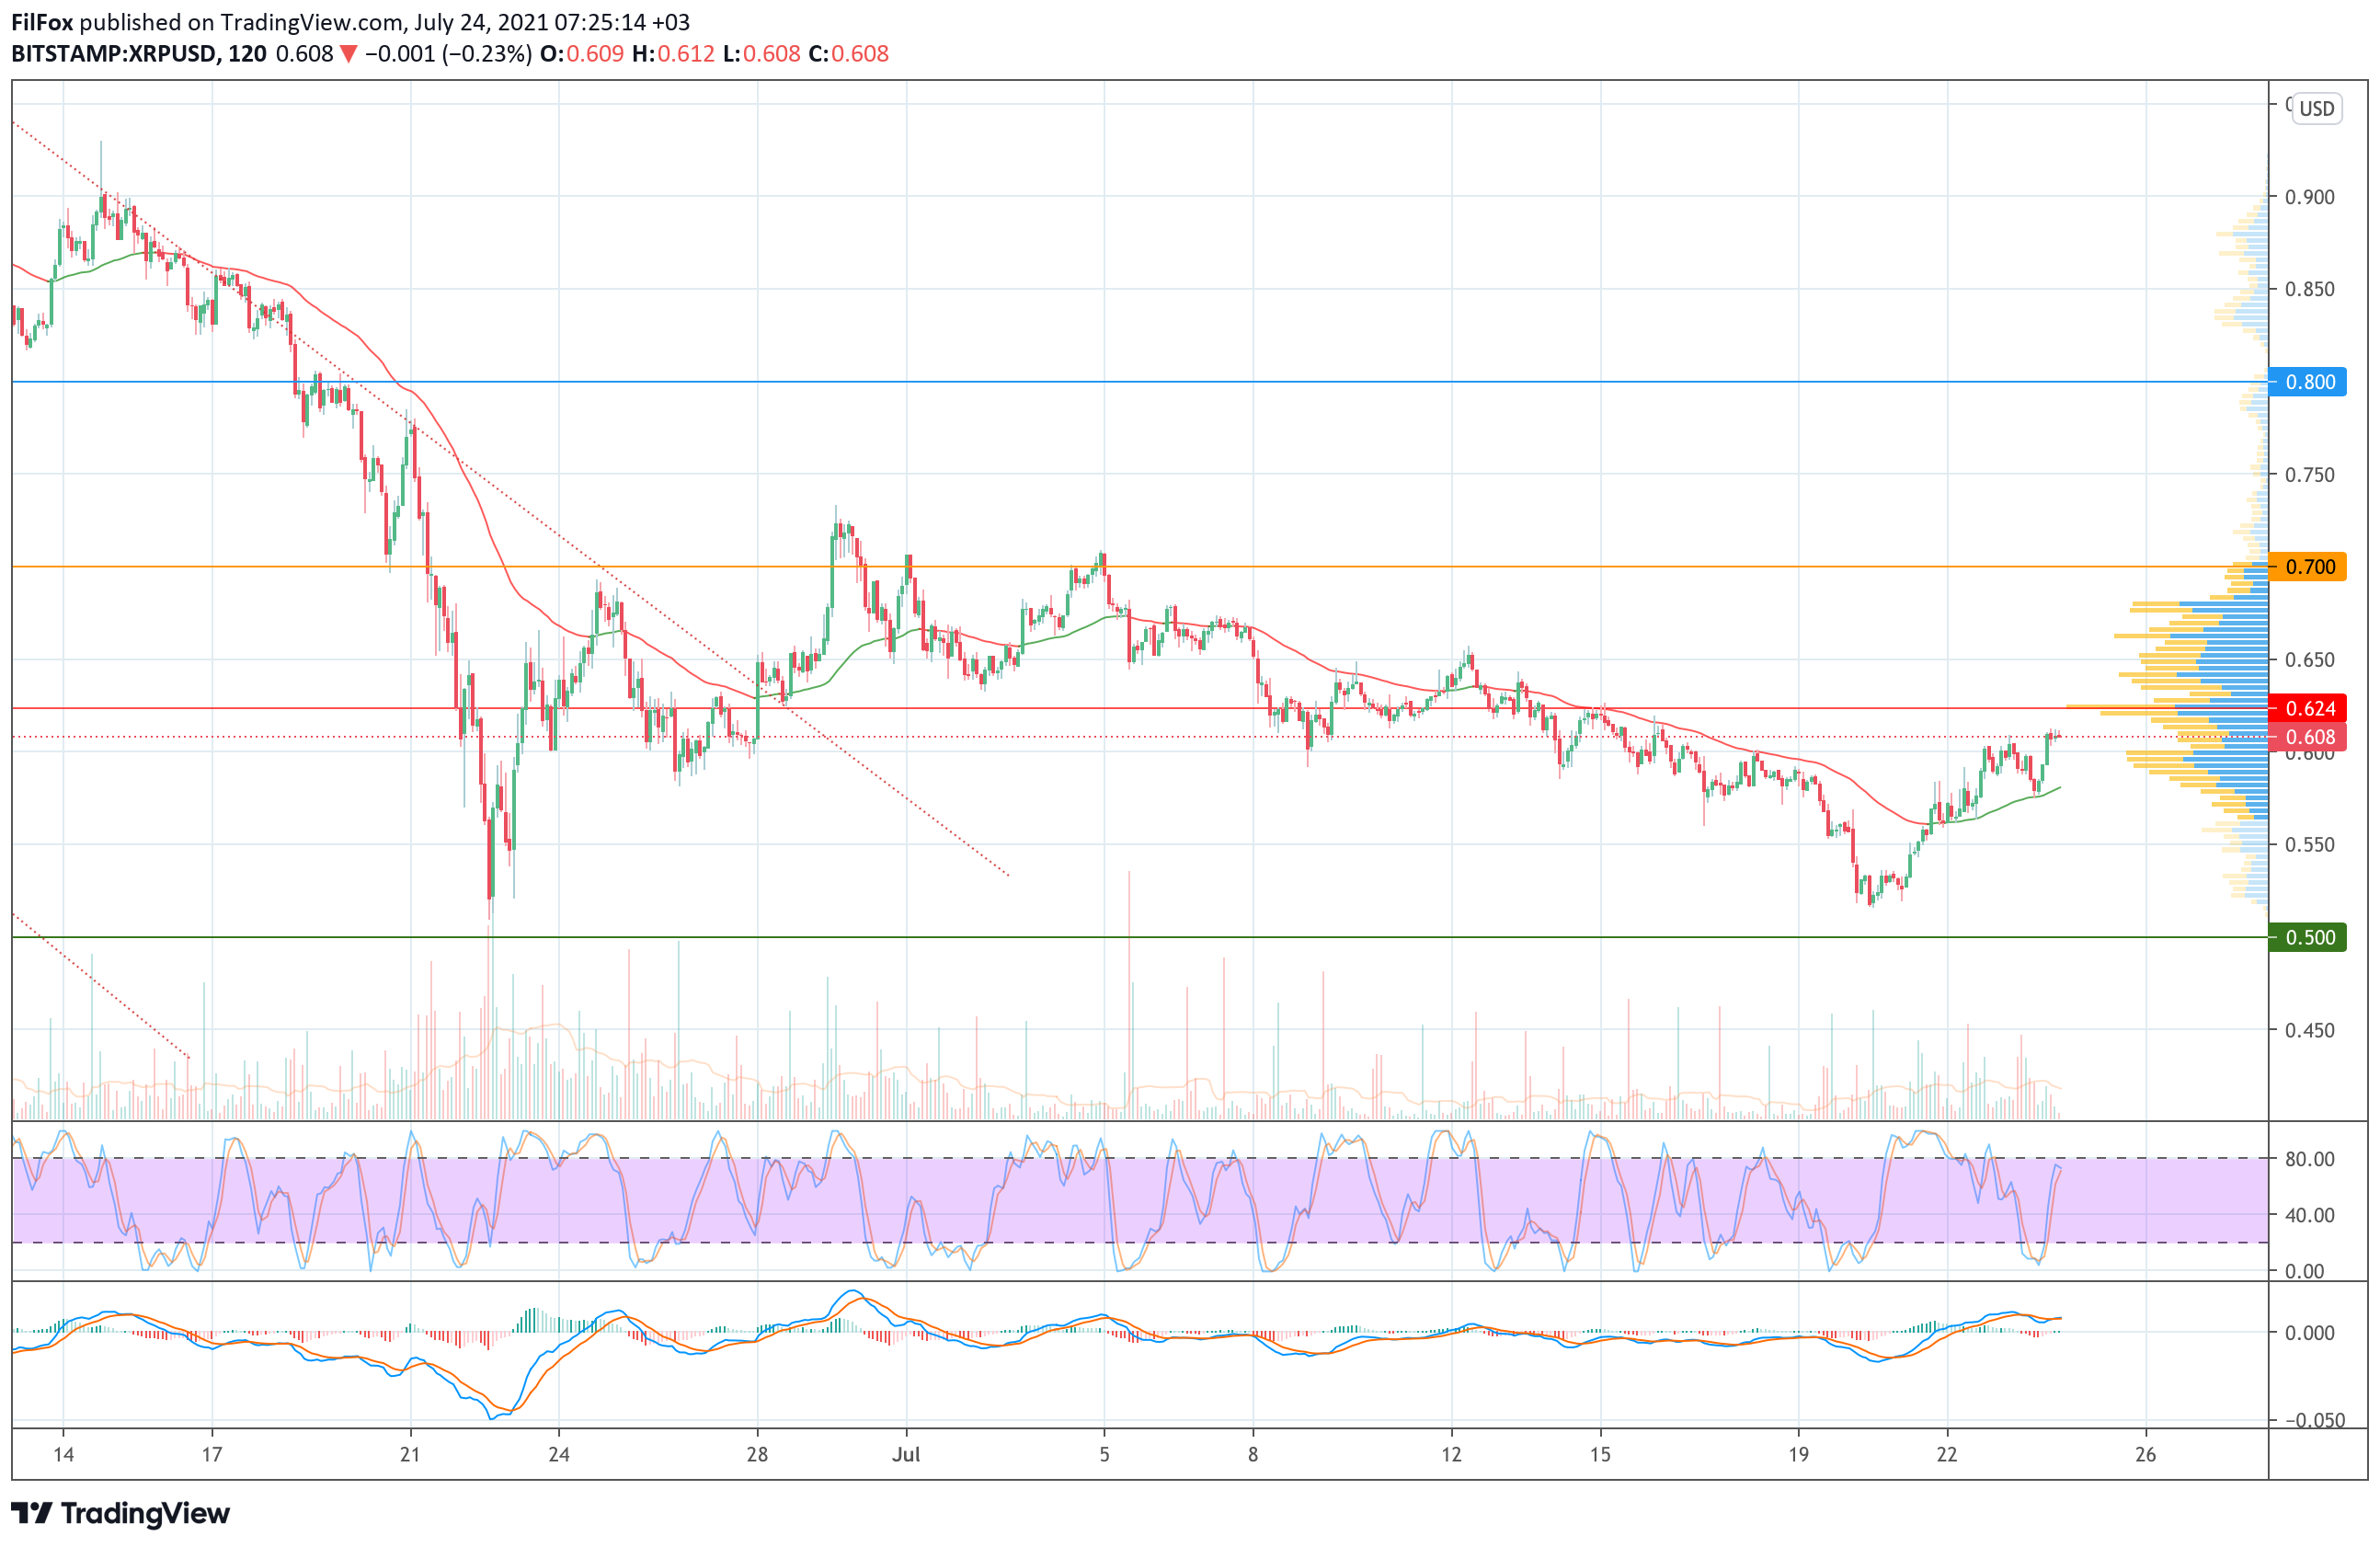 Analysis of prices for Bitcoin, Ethereum, XRP for 07/24/2021